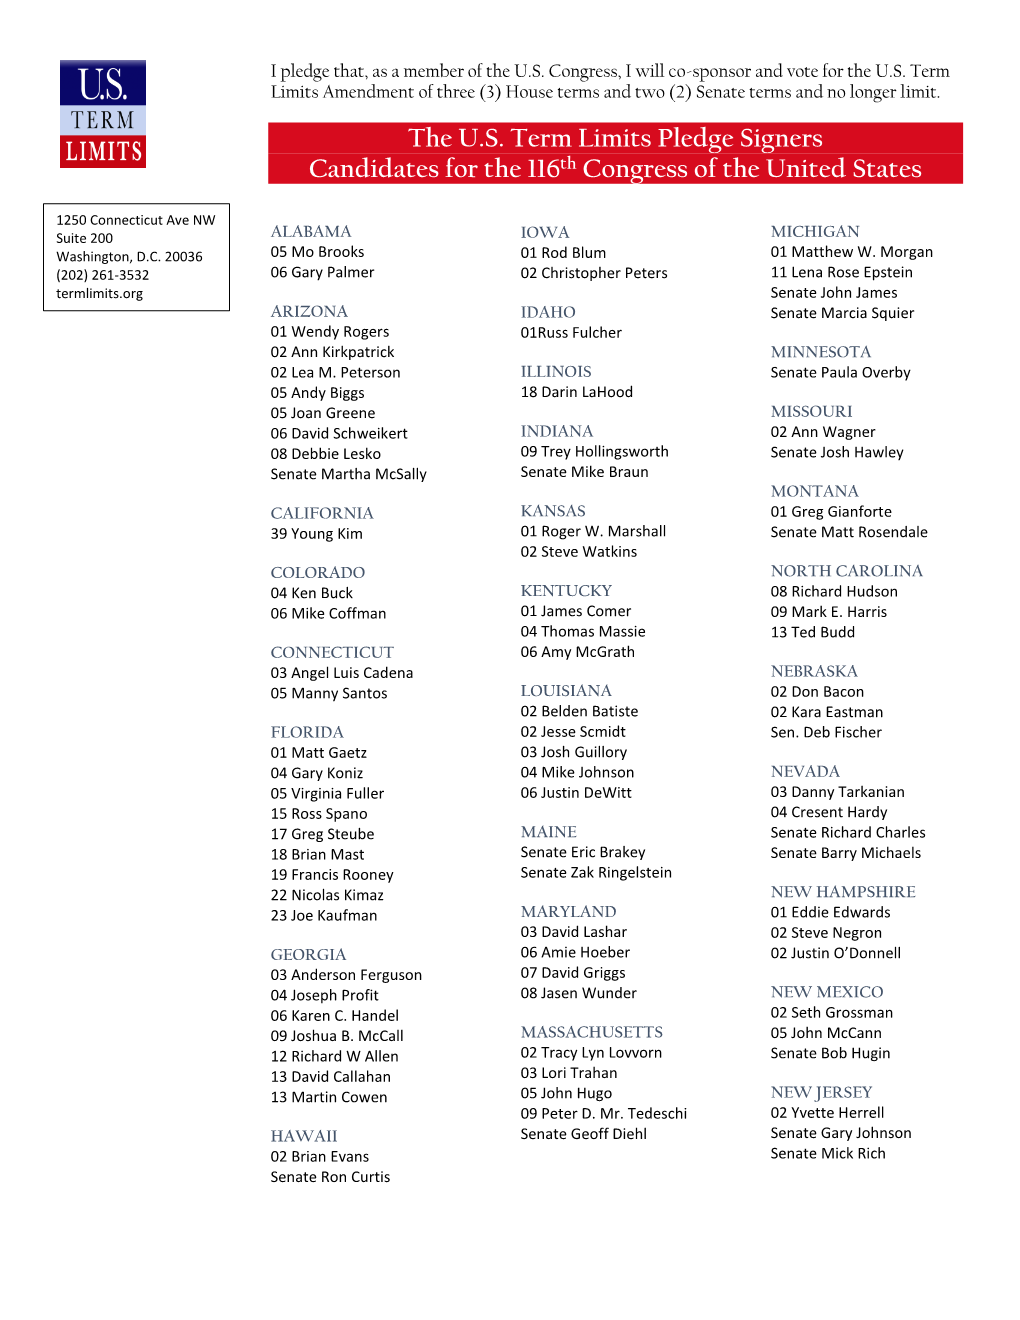 The U.S. Term Limits Pledge Signers Candidates for the 116Th Congress of the United States